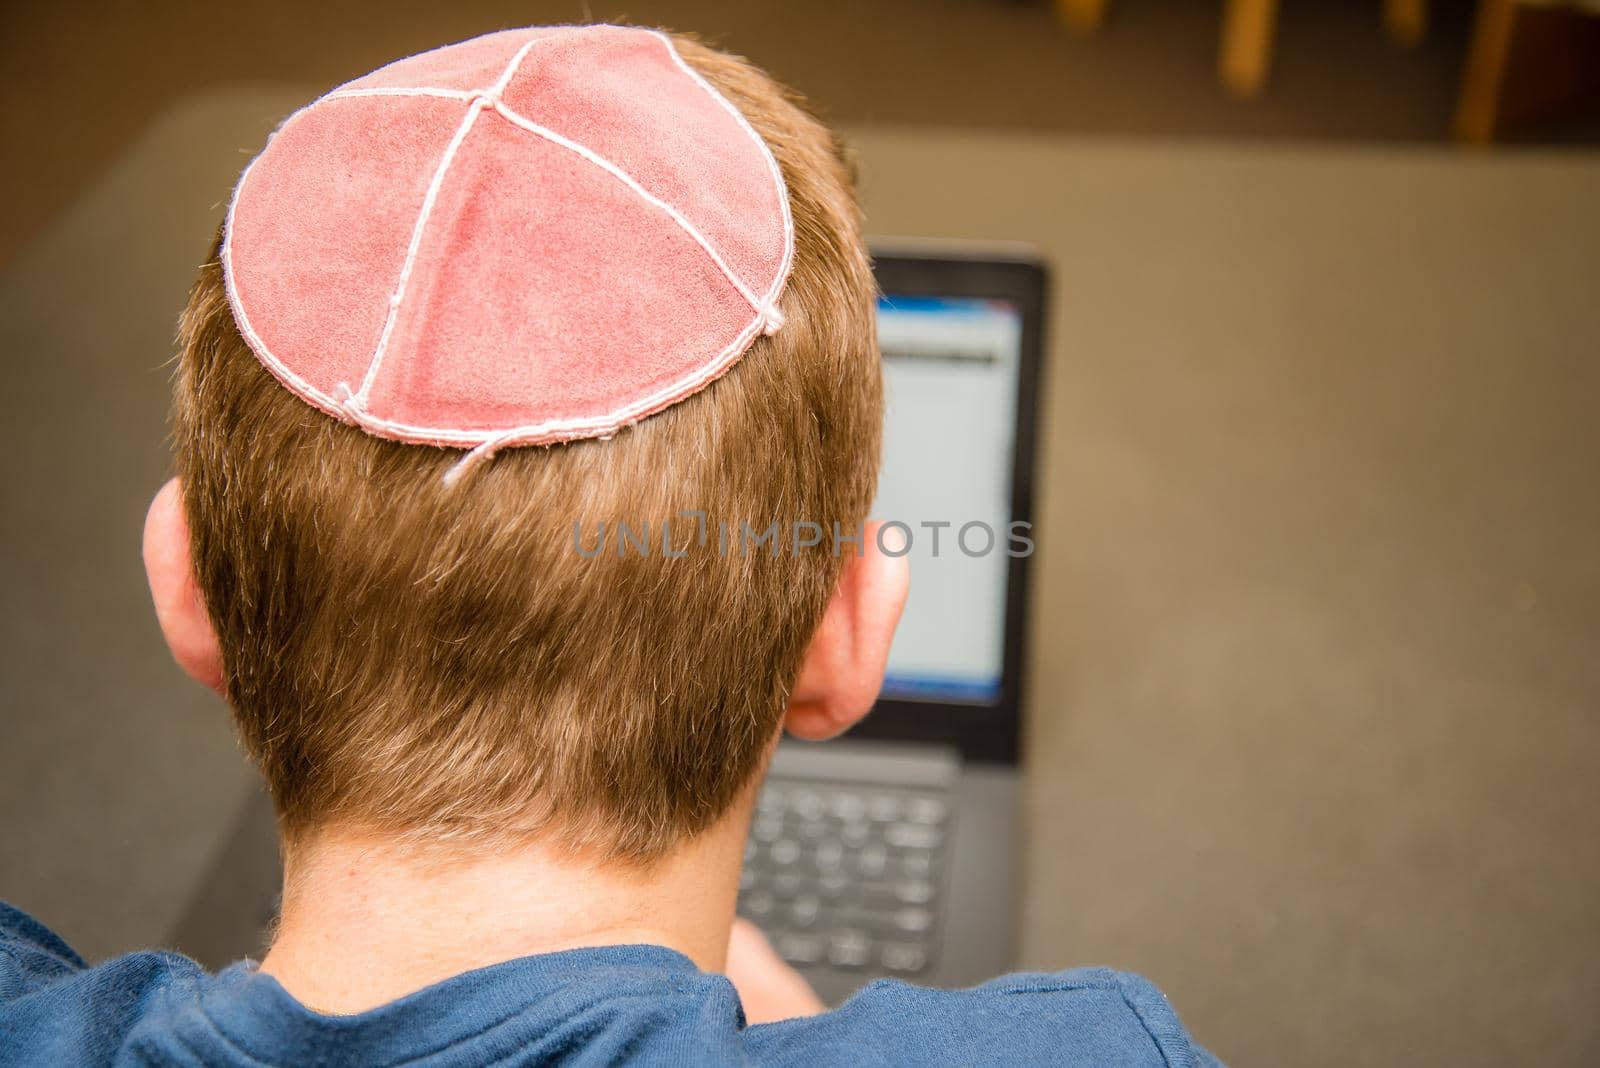 Young man wearing a yarmulke from the back doing work on a laptop in a library with colorful books on shelves.